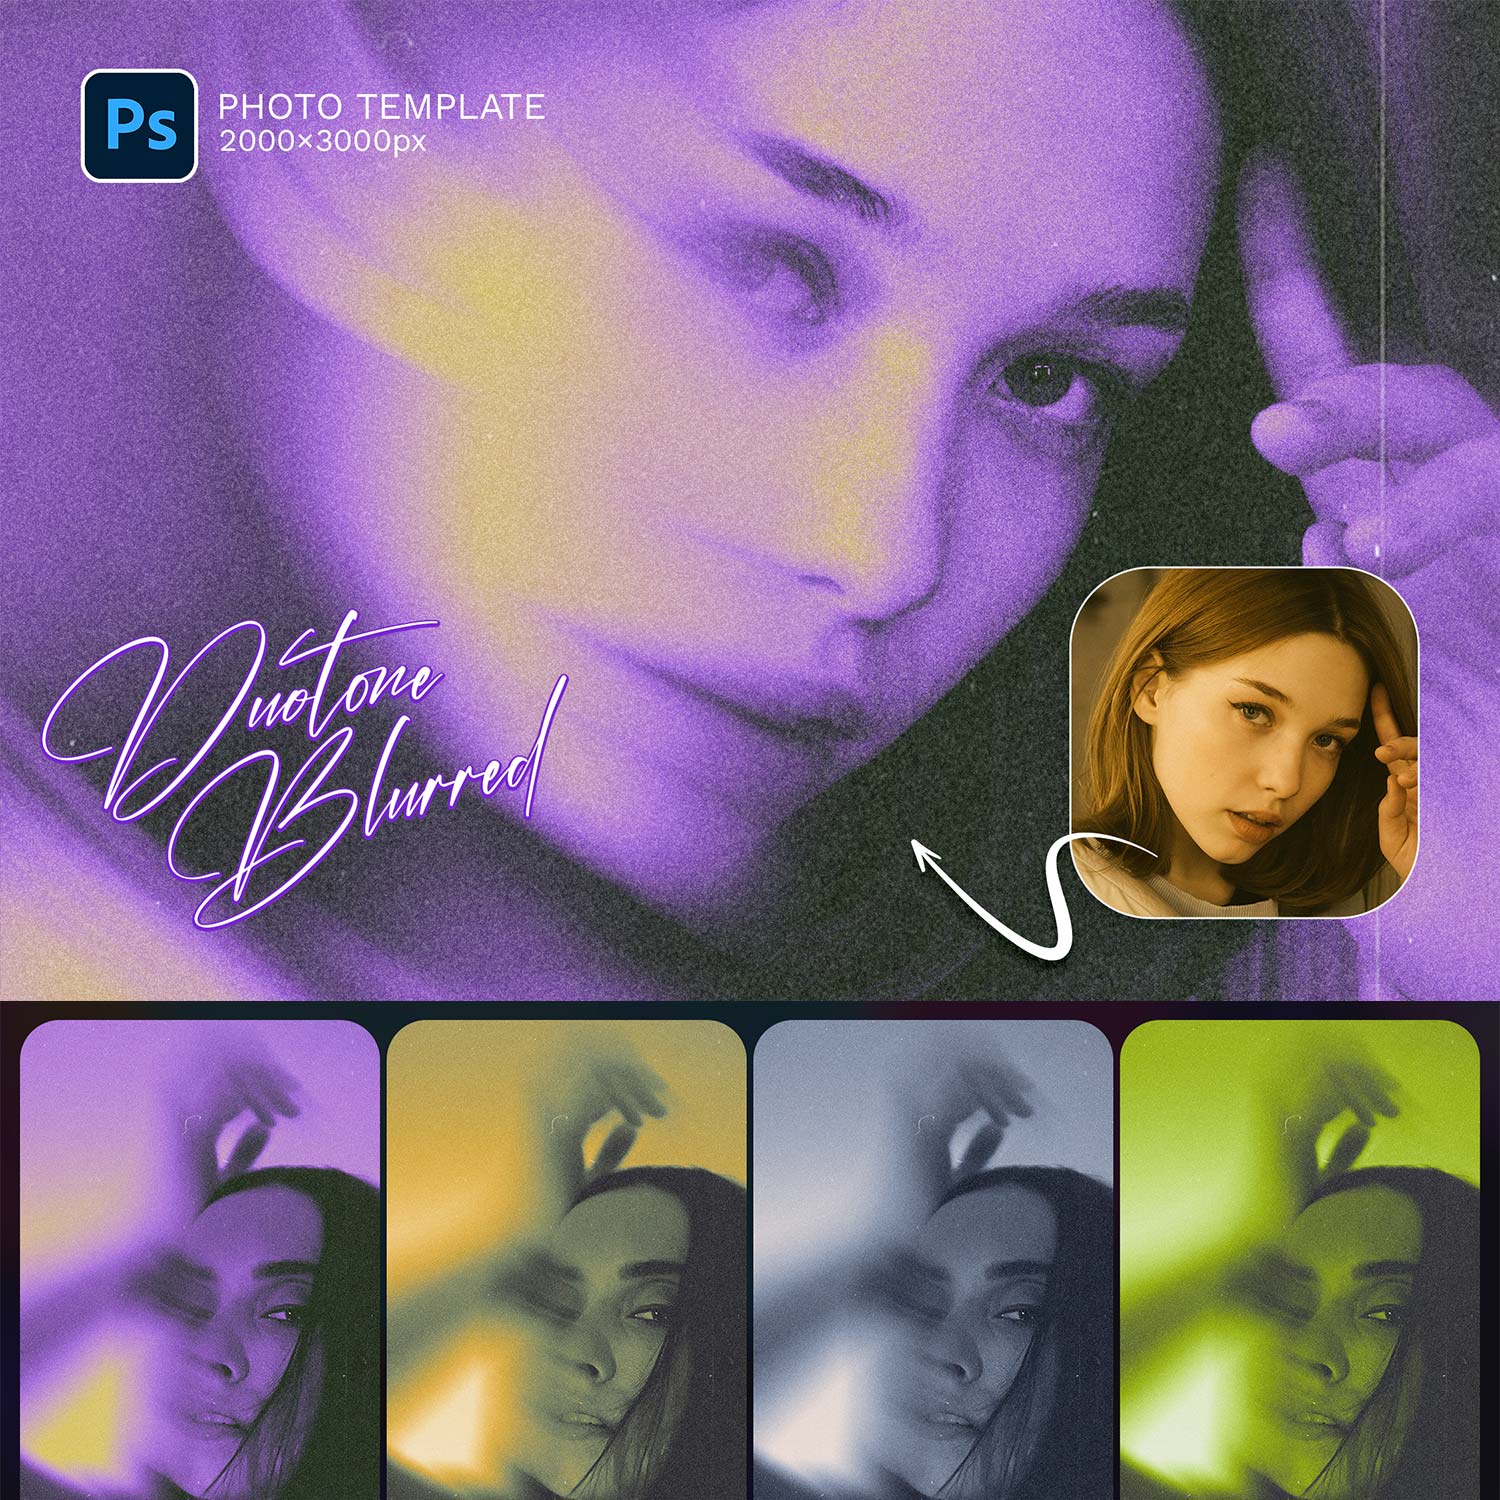 Duotone Blurred Photo Template cover image.